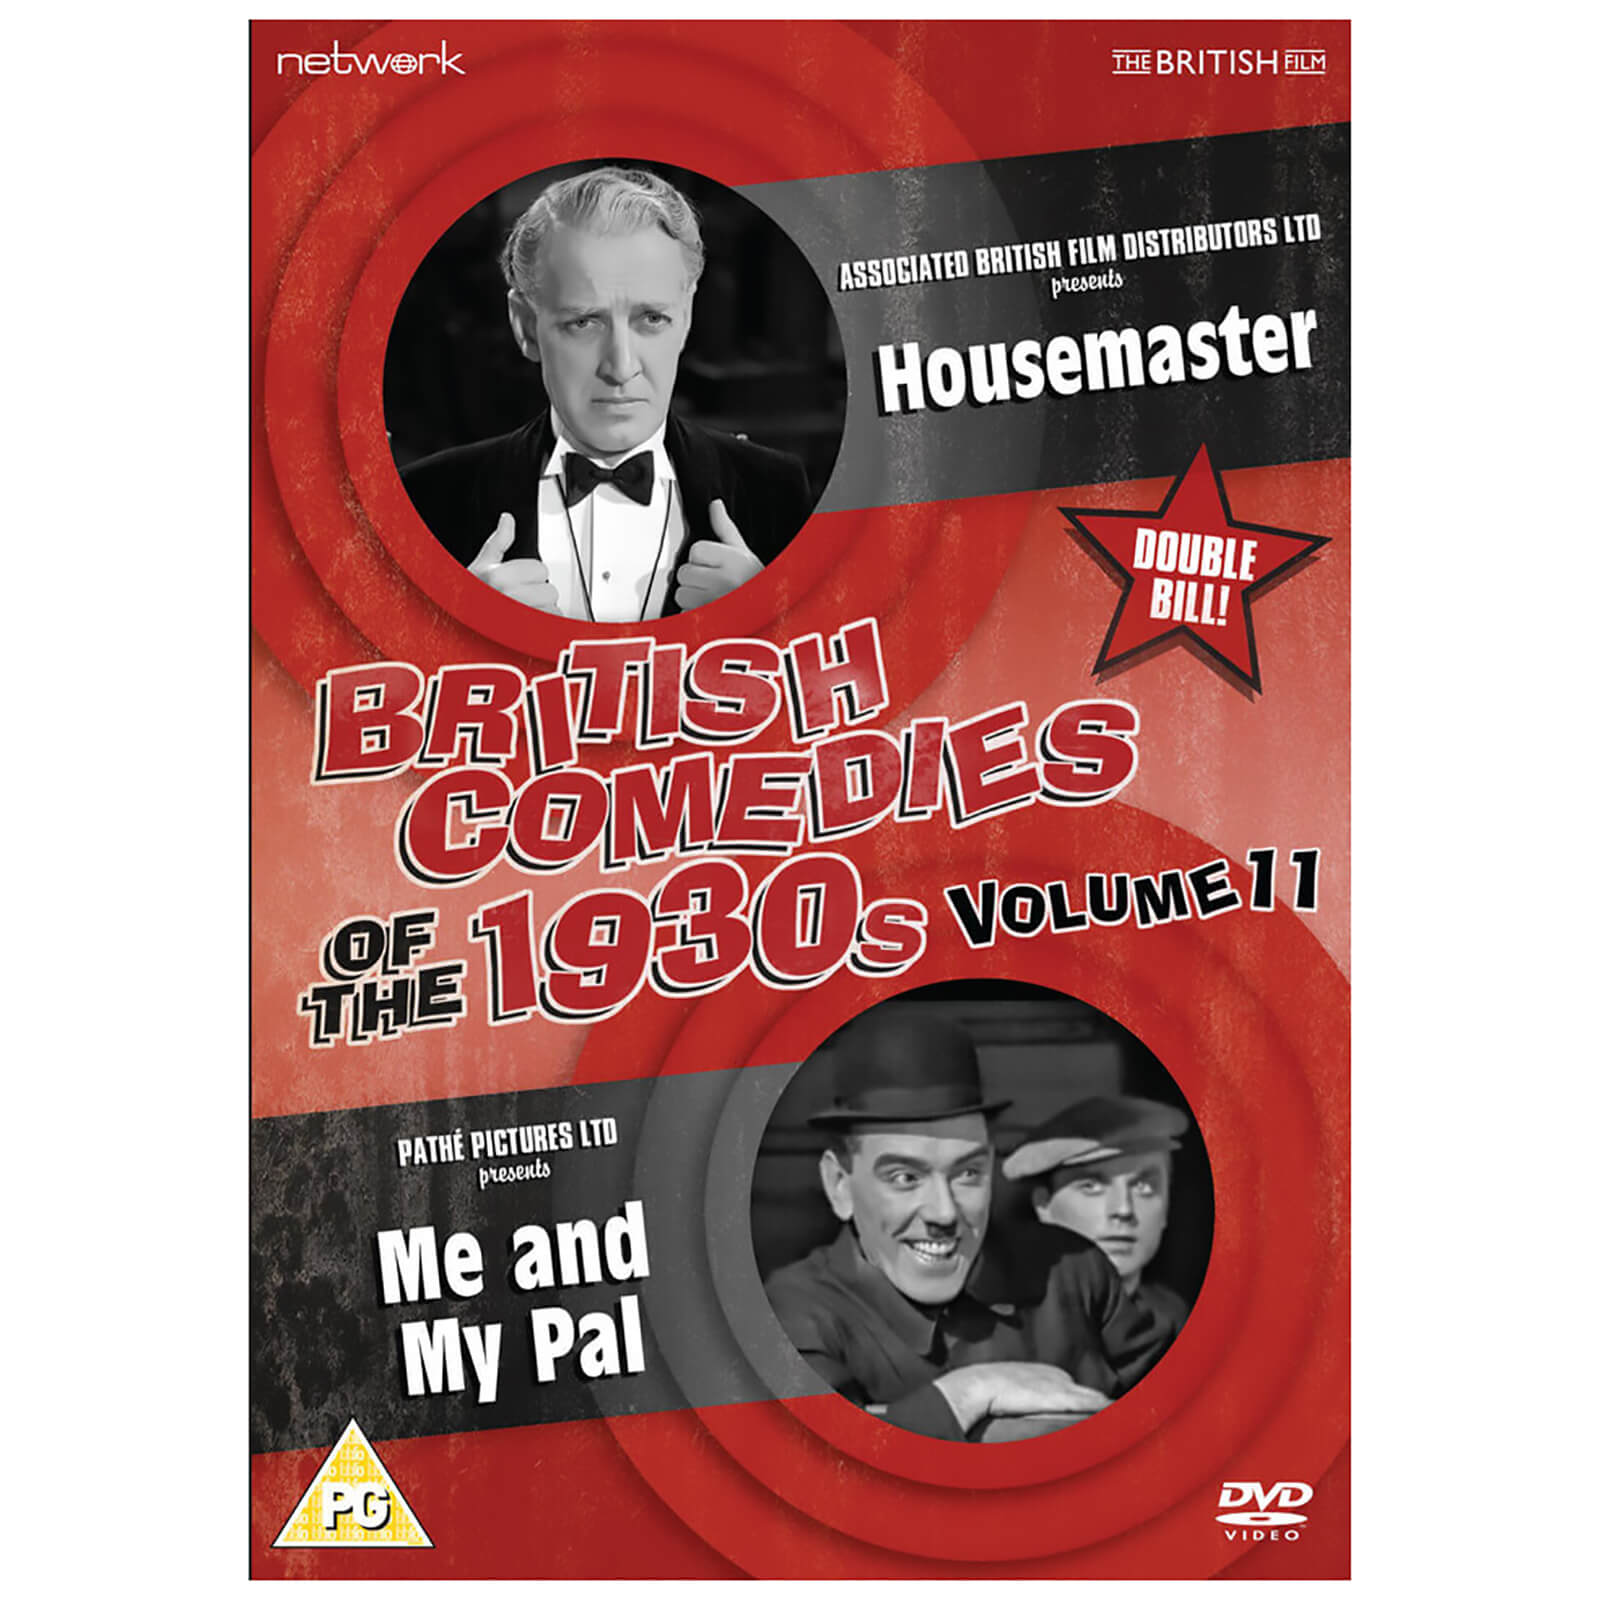 British Comedies of the 1930s Vol. 11: Housemaster/Me and My Pal von Network